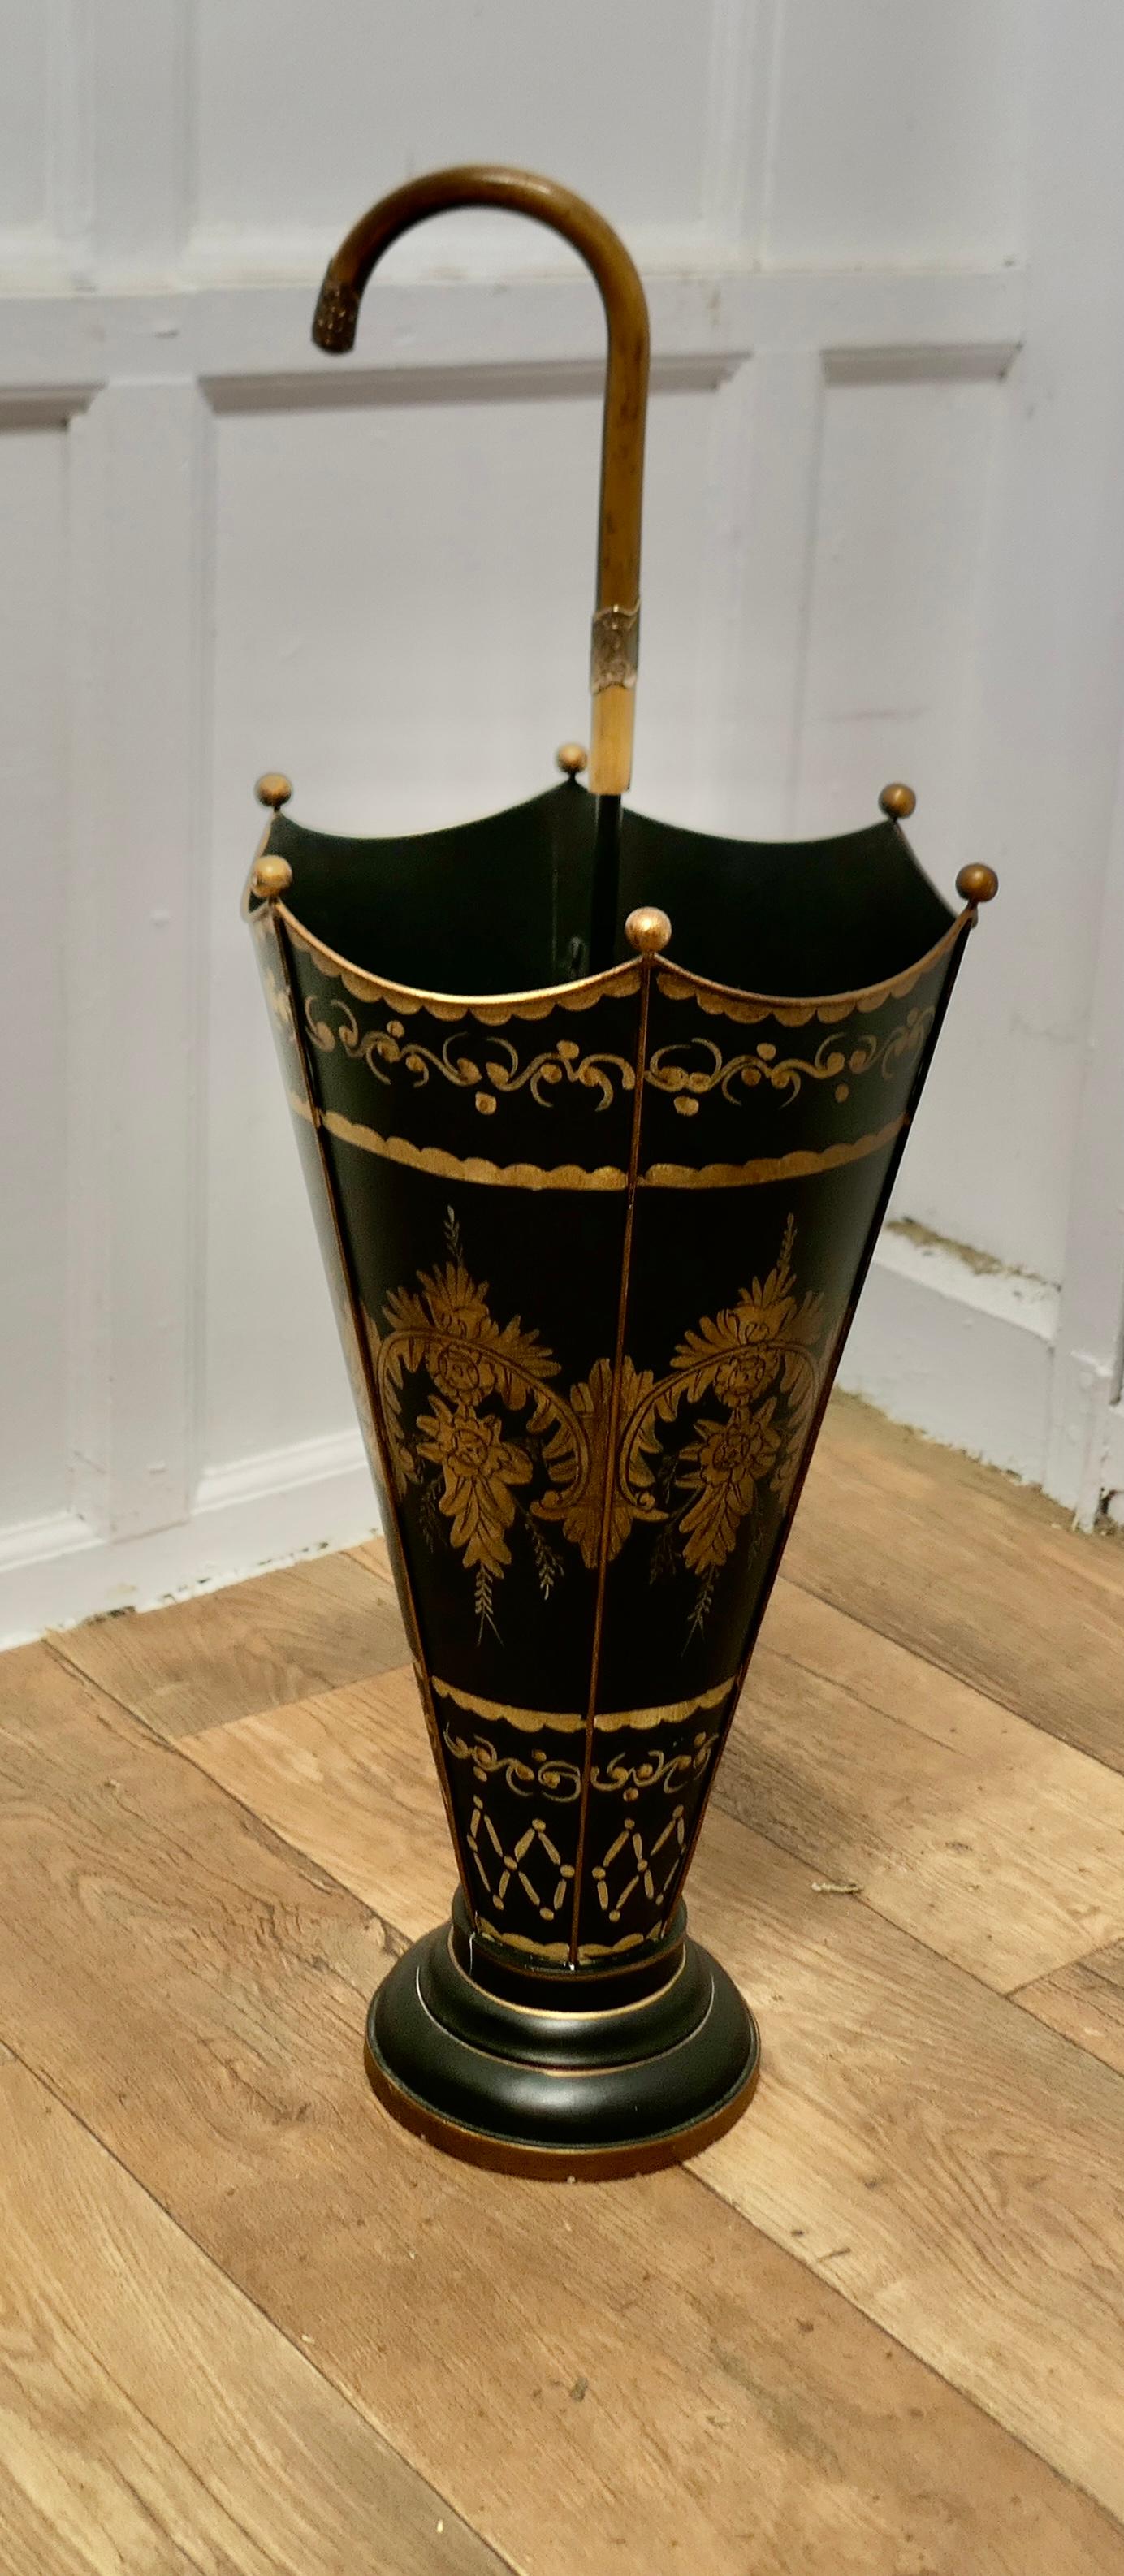 A Superb Italian Toleware Umbrella Stand, Hand Painted Gold on Black    In Good Condition For Sale In Chillerton, Isle of Wight